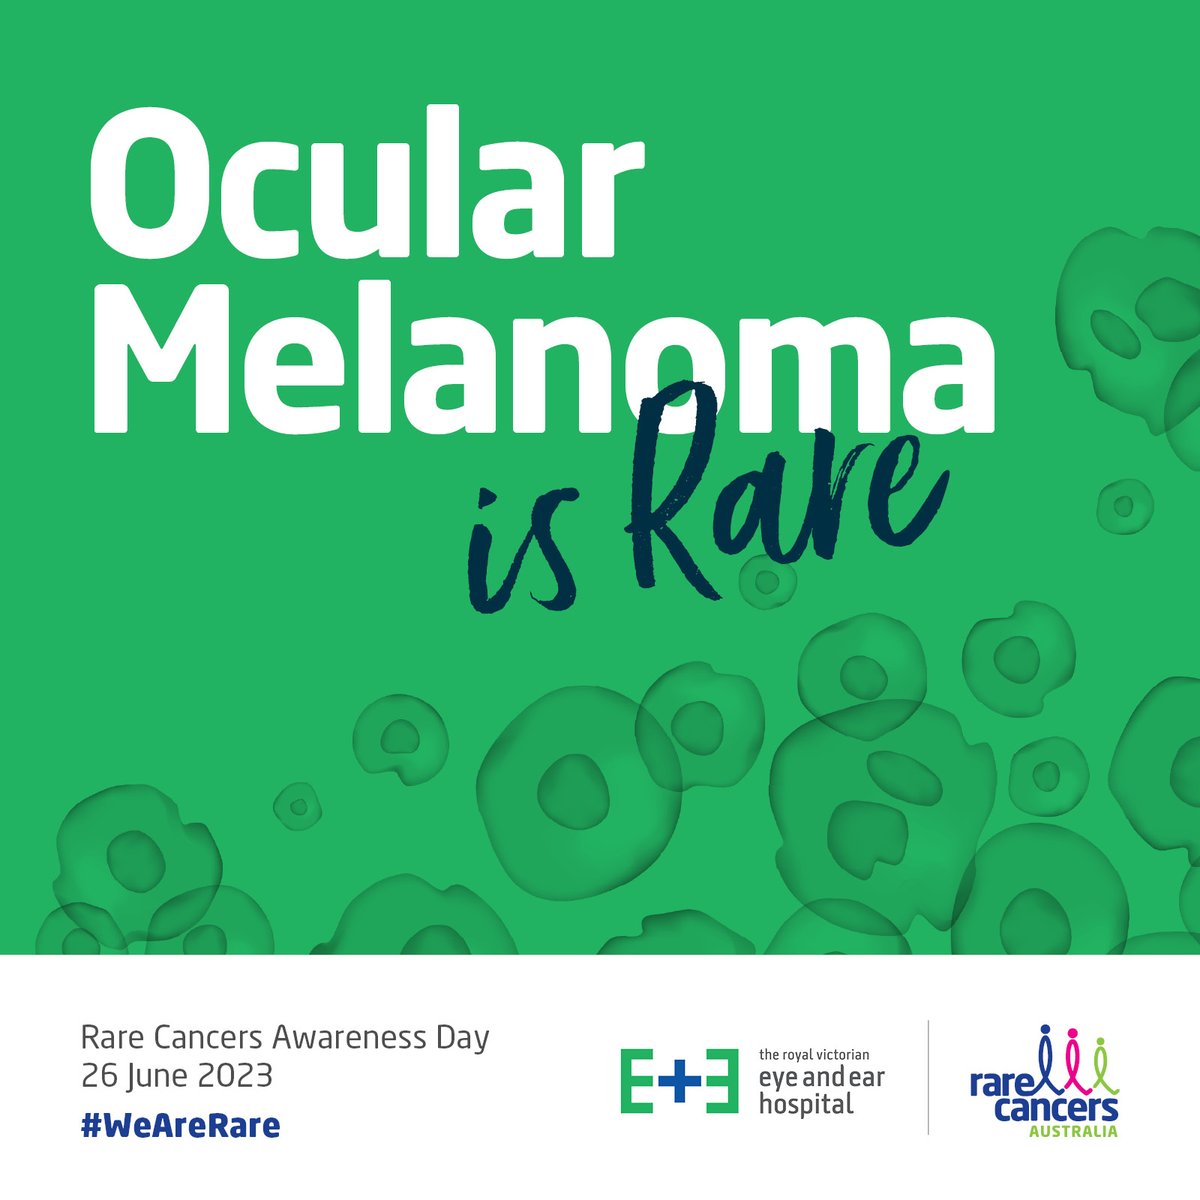 Today we shine a light on #RareCancersAwarenessDay. One rare type of cancer is Ocular Melanoma. Here at the Eye and Ear we have an ocular oncology clinic with highly trained specialists who are dedicated to providing exceptional care.
#WeAreRare #Youareinsafehands